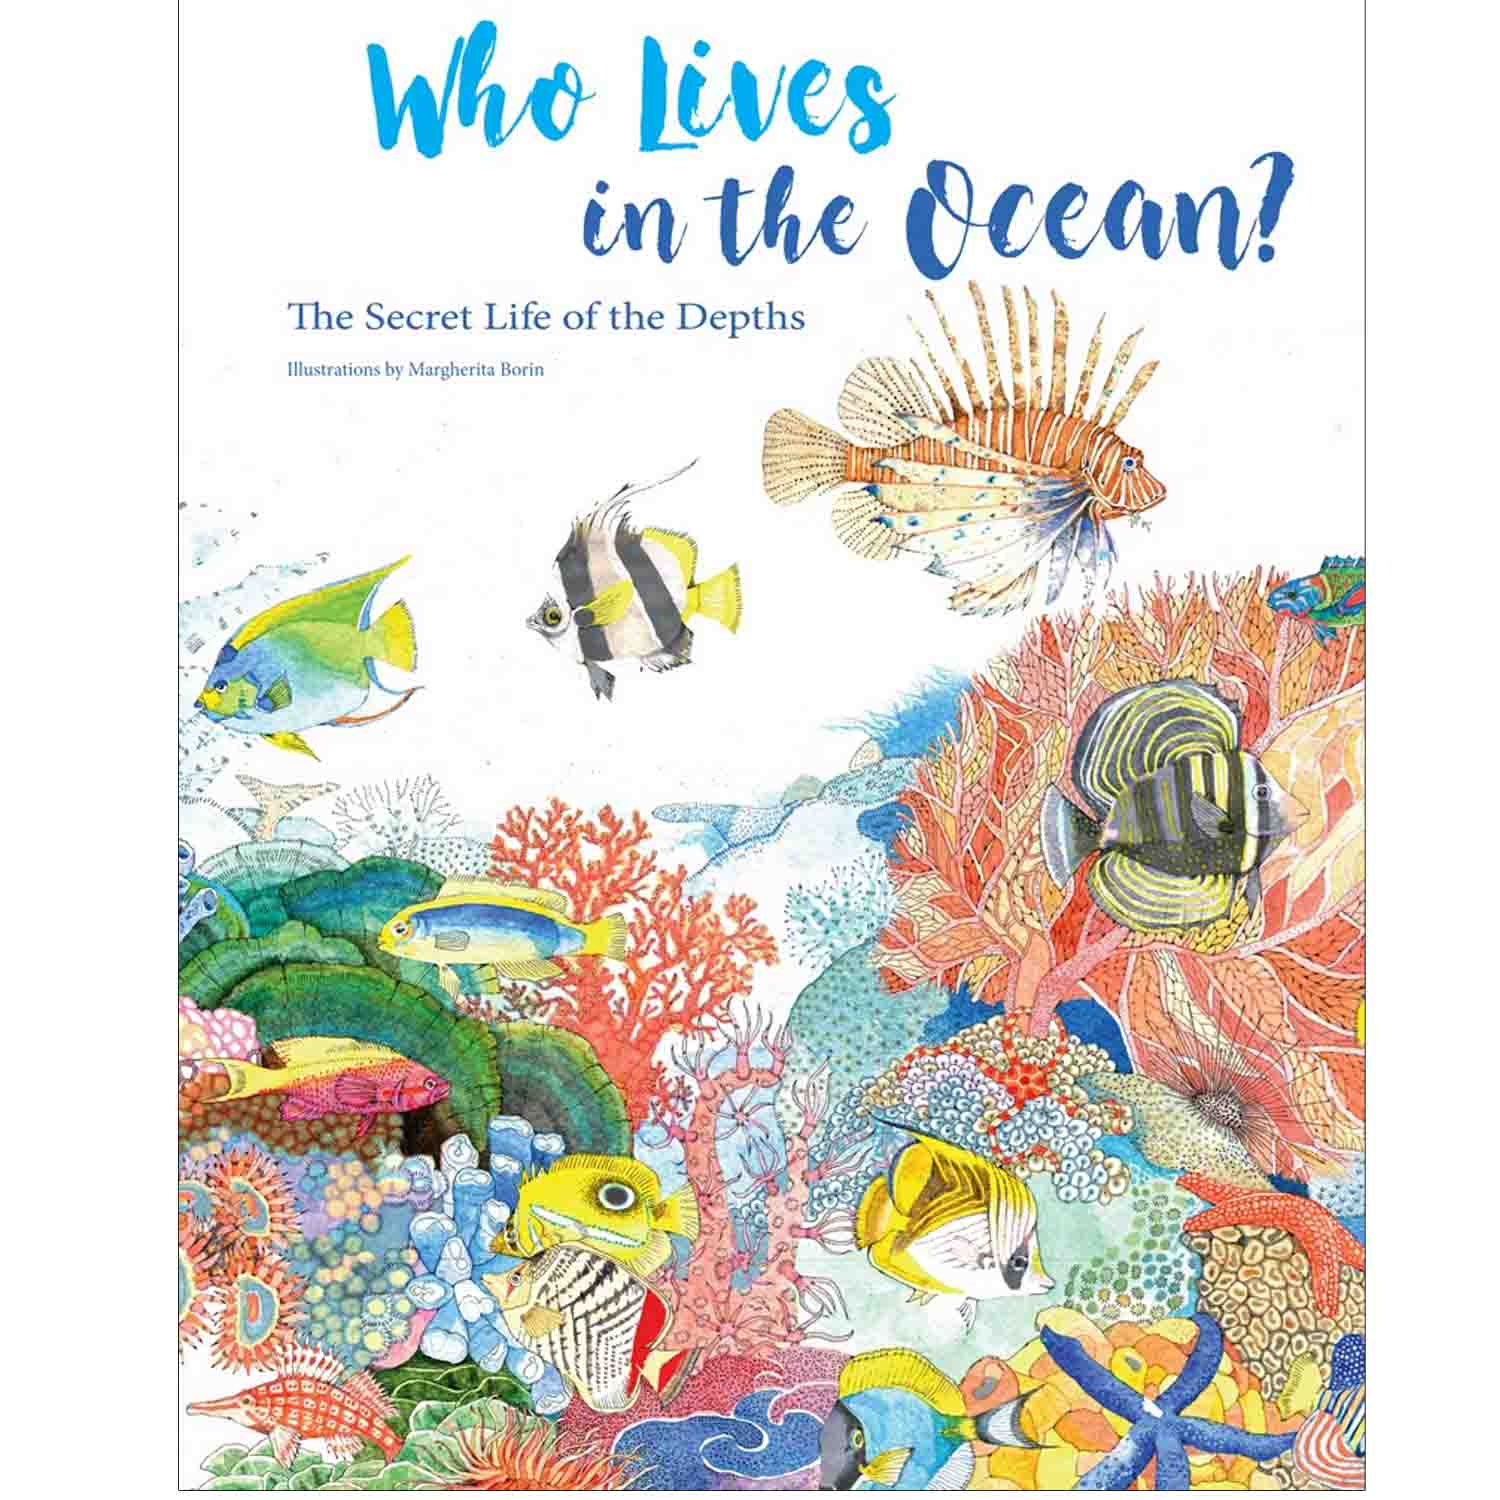 Who Lives In The Ocean?: The Secret Life of the Depths